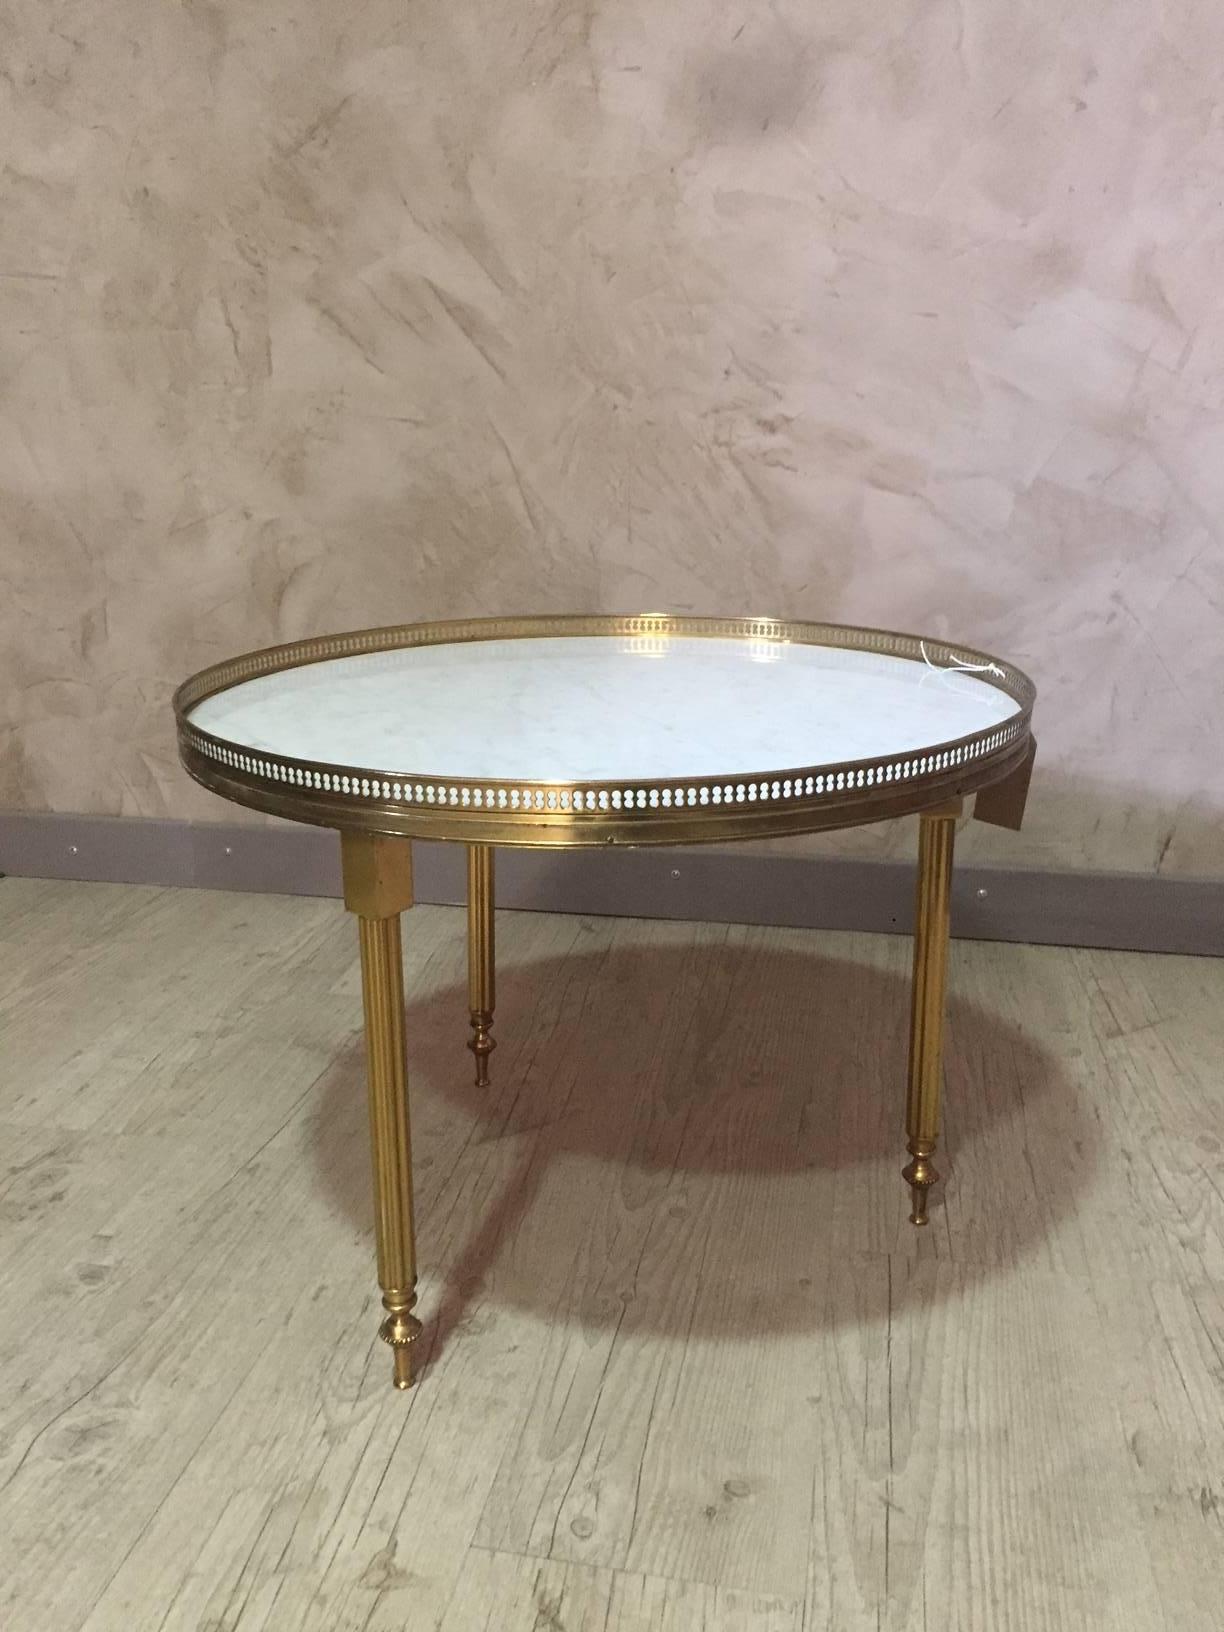 Very nice round coffee table in gilded brass and white marble, 1950s.
Three feet.